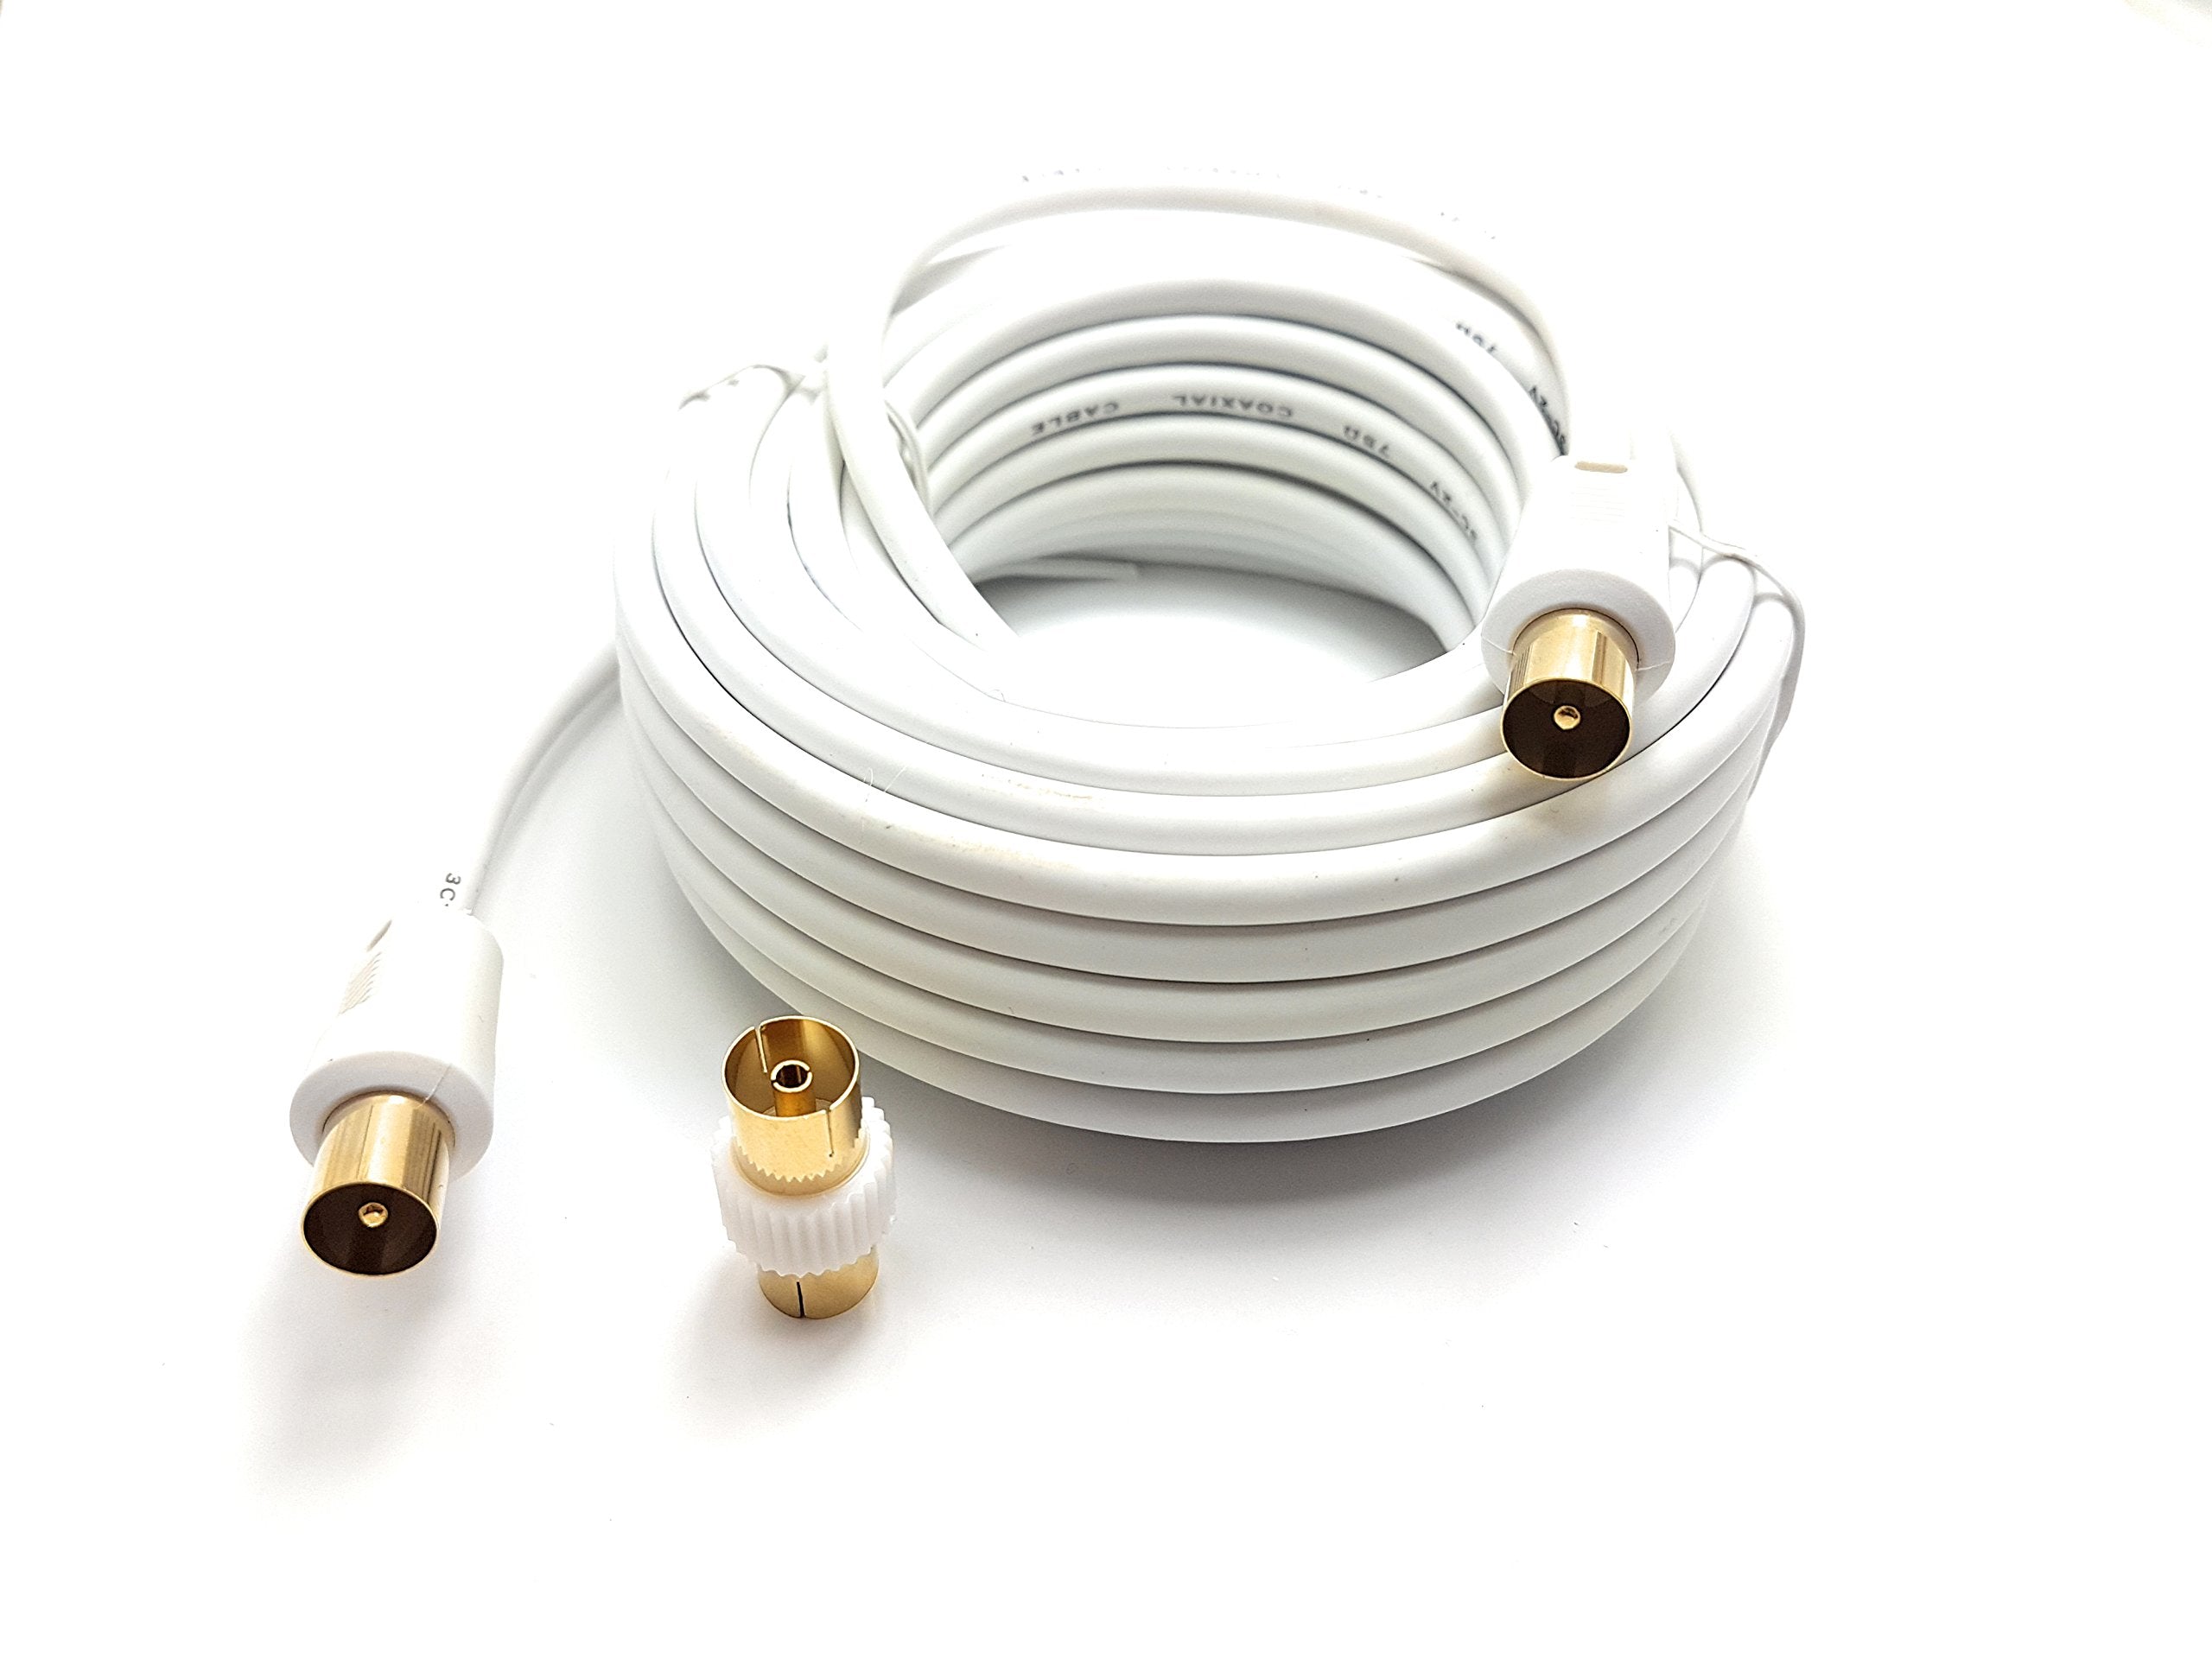 MainCore 10m Long White Gold Plated RF TV Freeview Plug to Plug White Aerial Antenna Lead Cable with Coupler (10m)